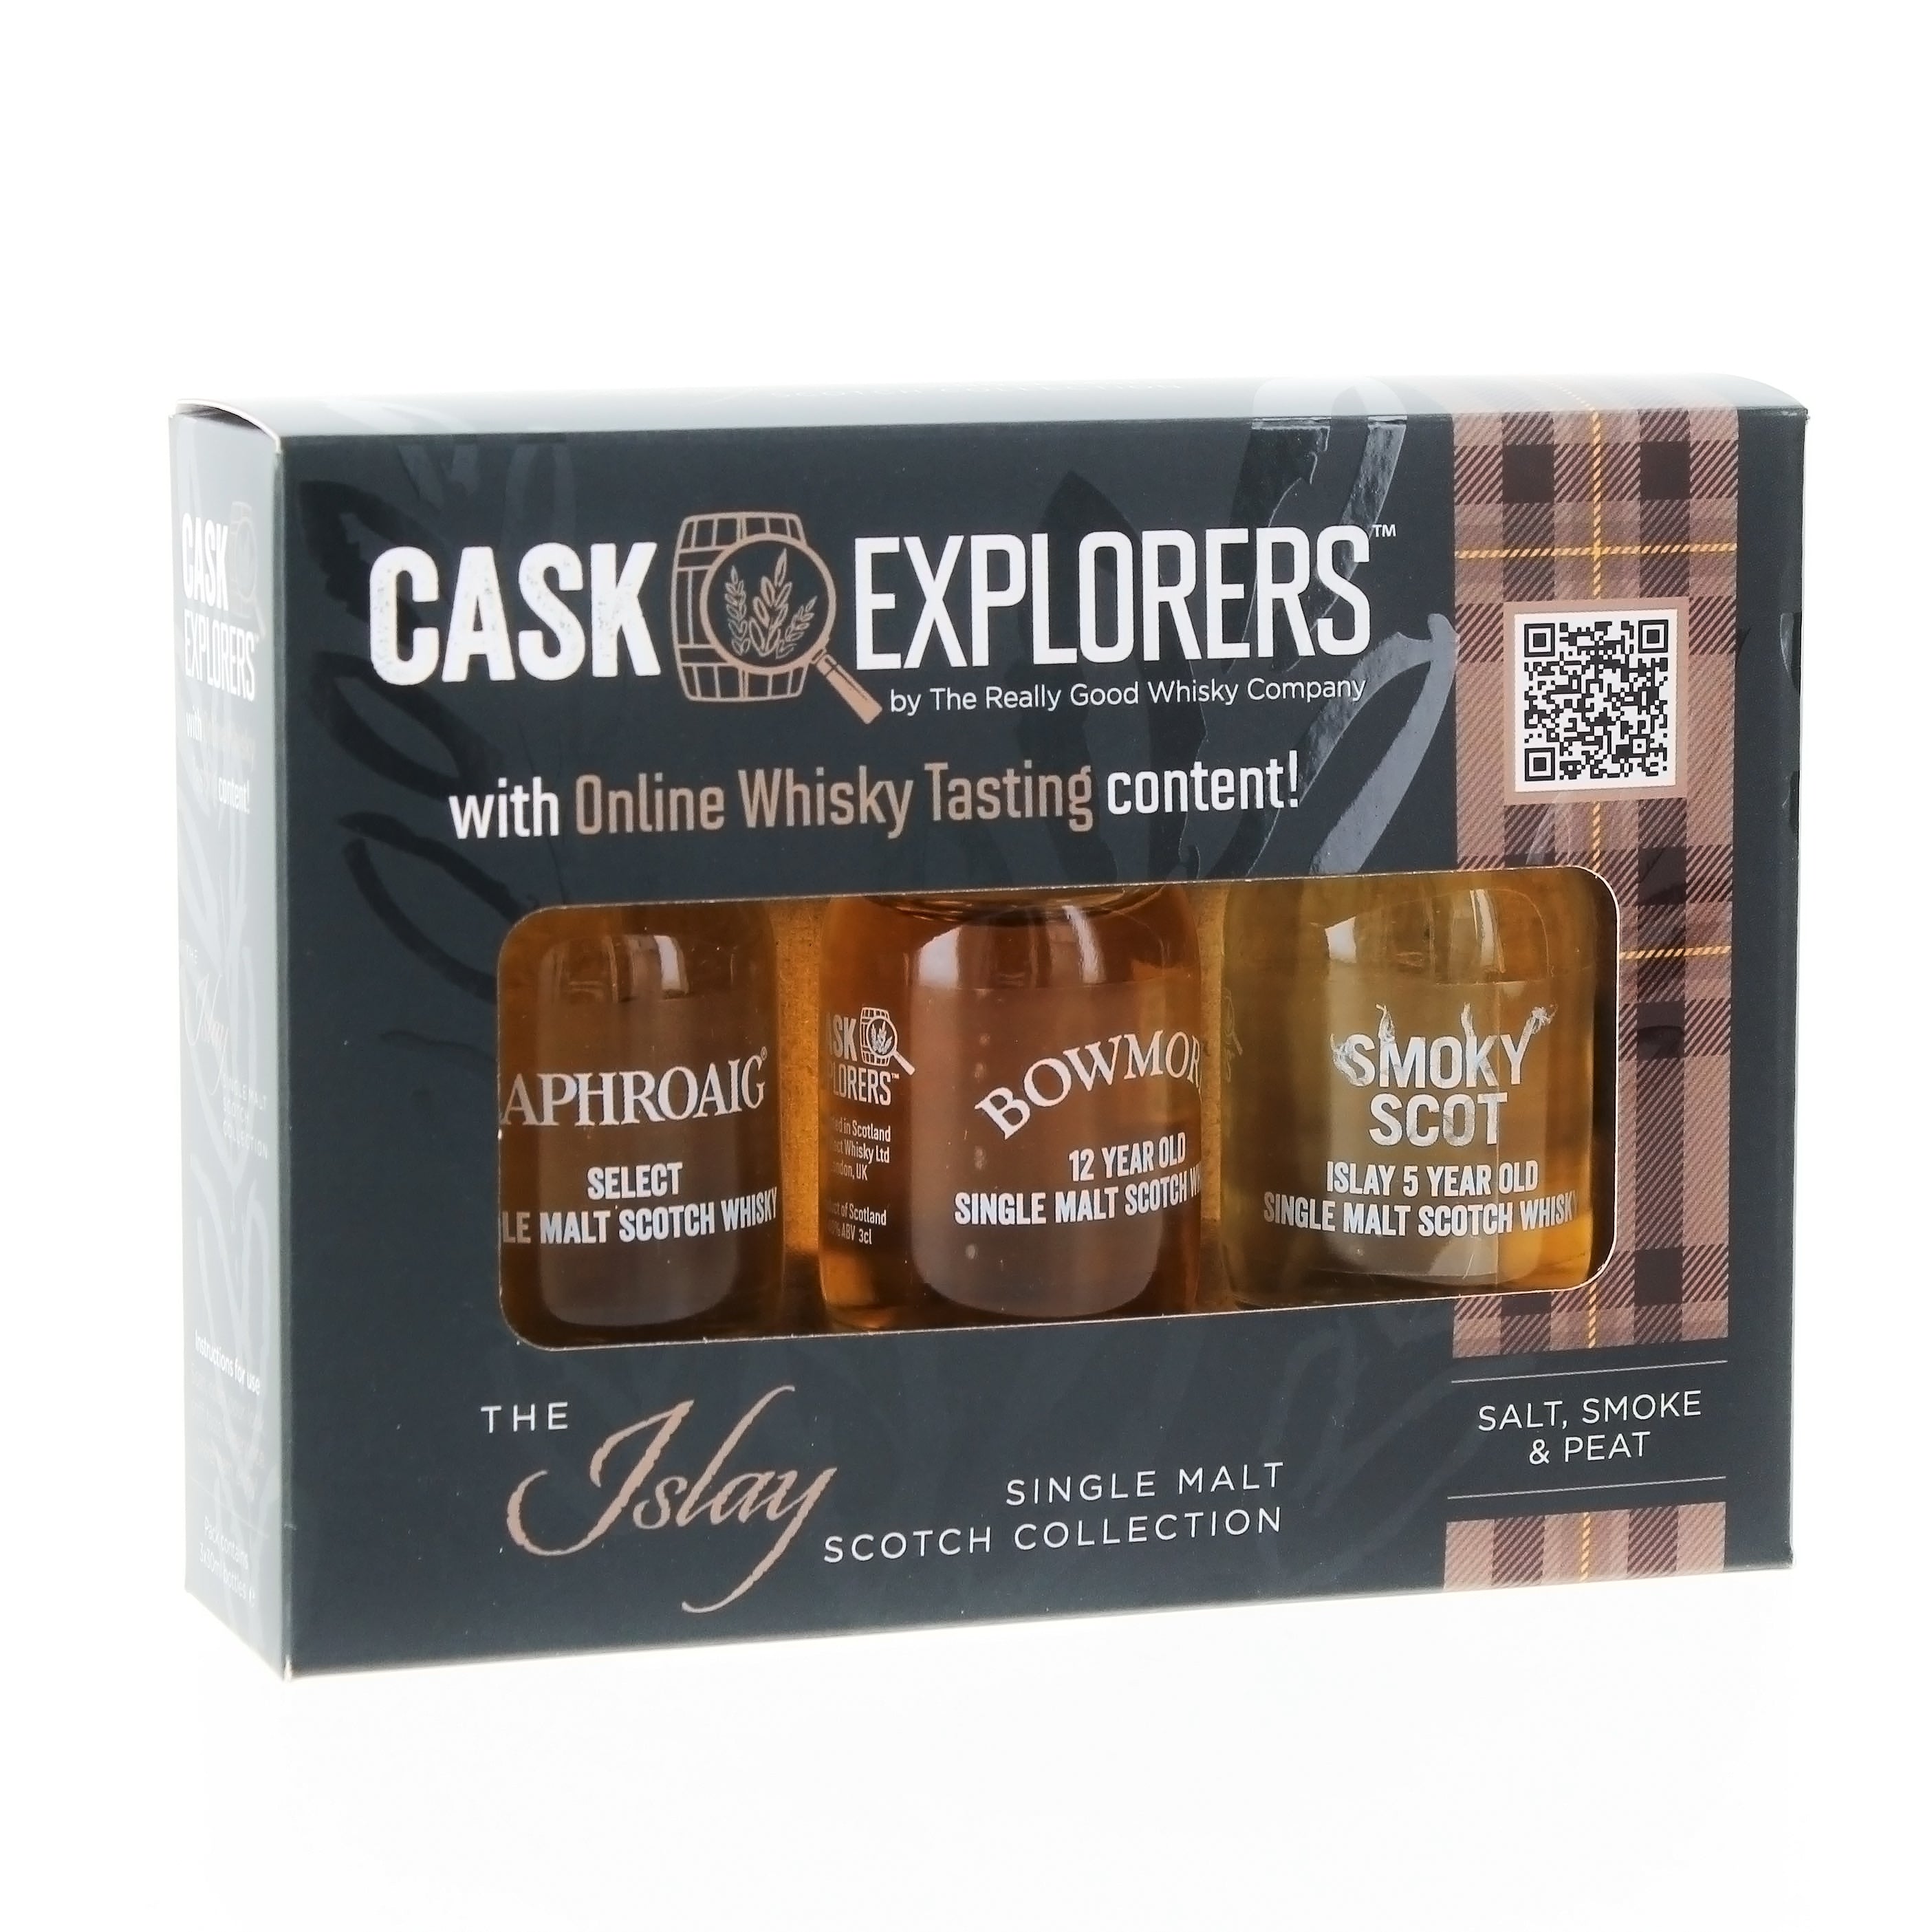 Scotch Whisky Islay Tasting Pack 3 Single Malt Teasers with online video link - 3 X 3cl - 42%